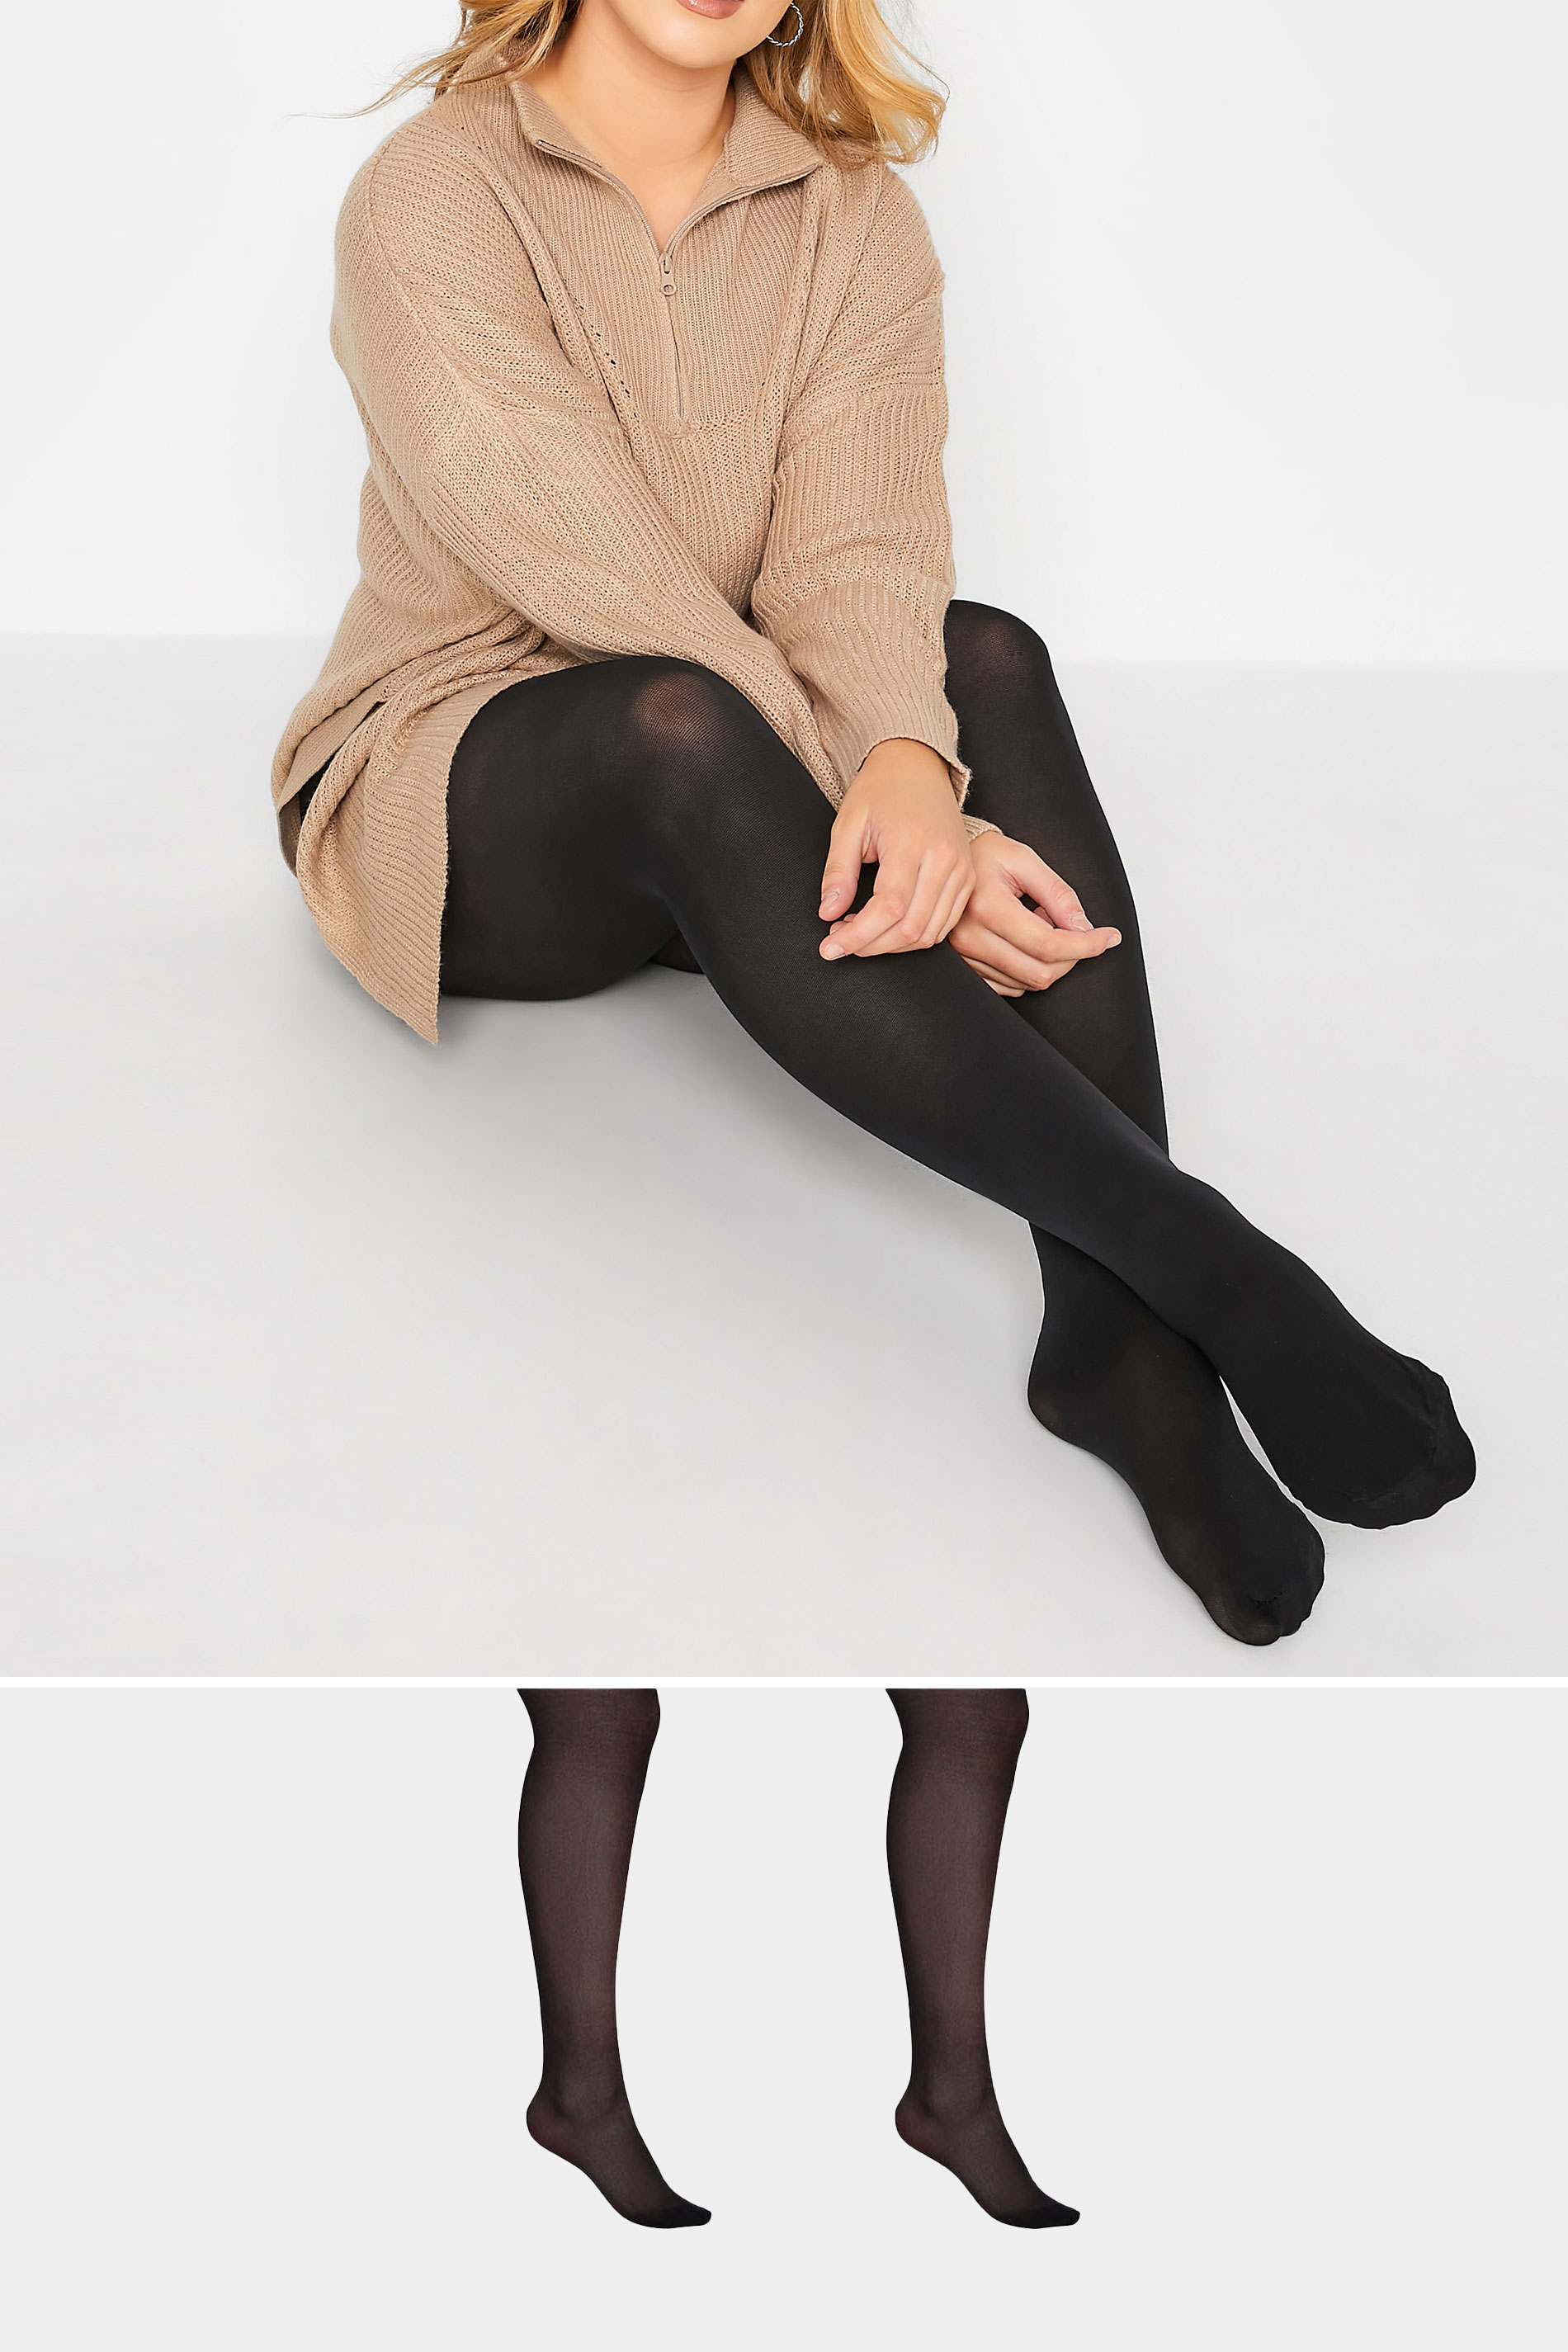 Plus Size 2 PACK Black 70 Denier Tights | Yours Clothing 1